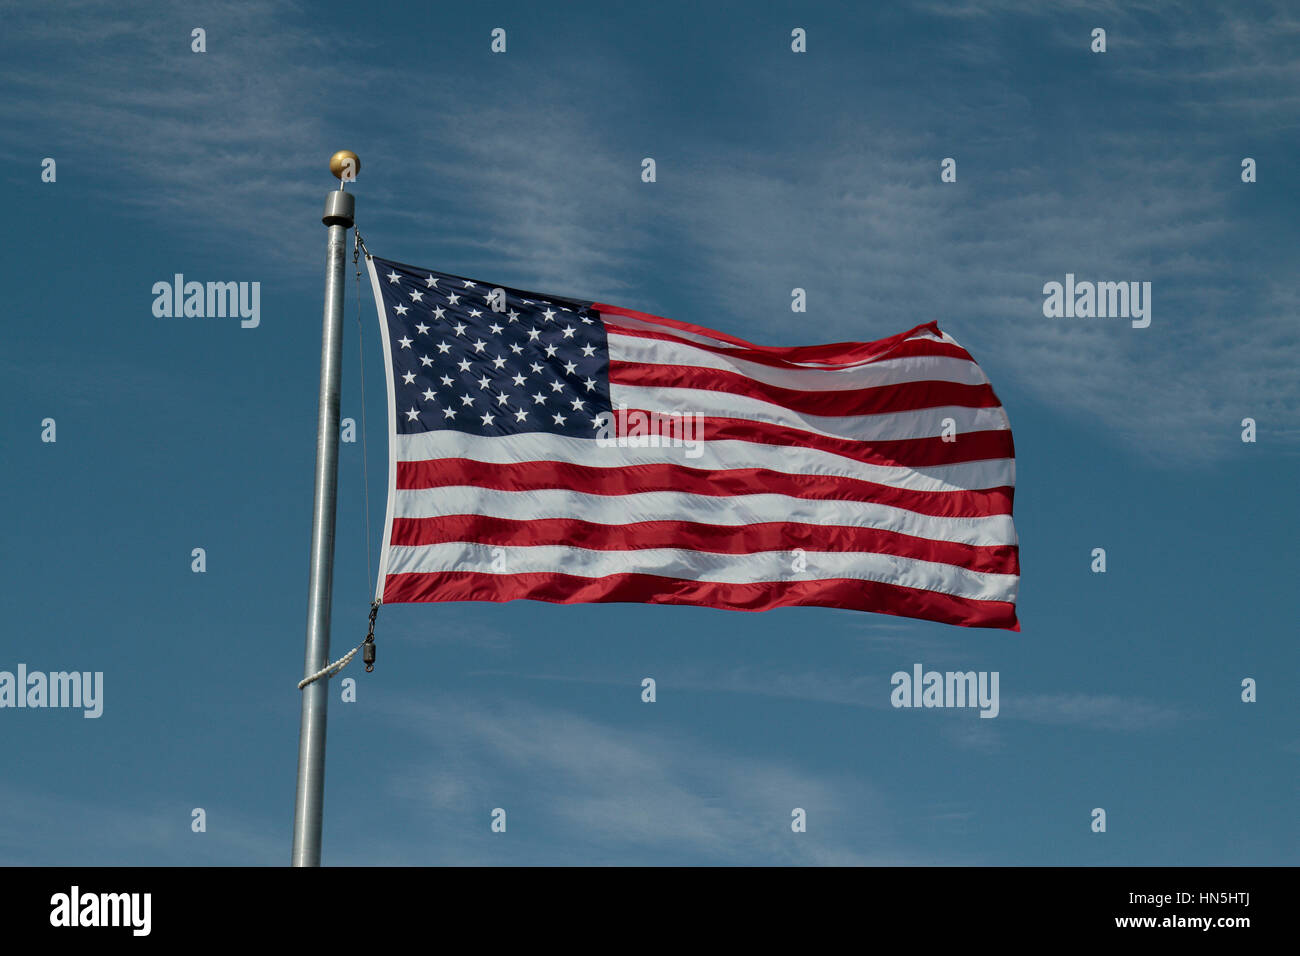 The Star Spangled Banner flying against a blue sky background. Stock Photo